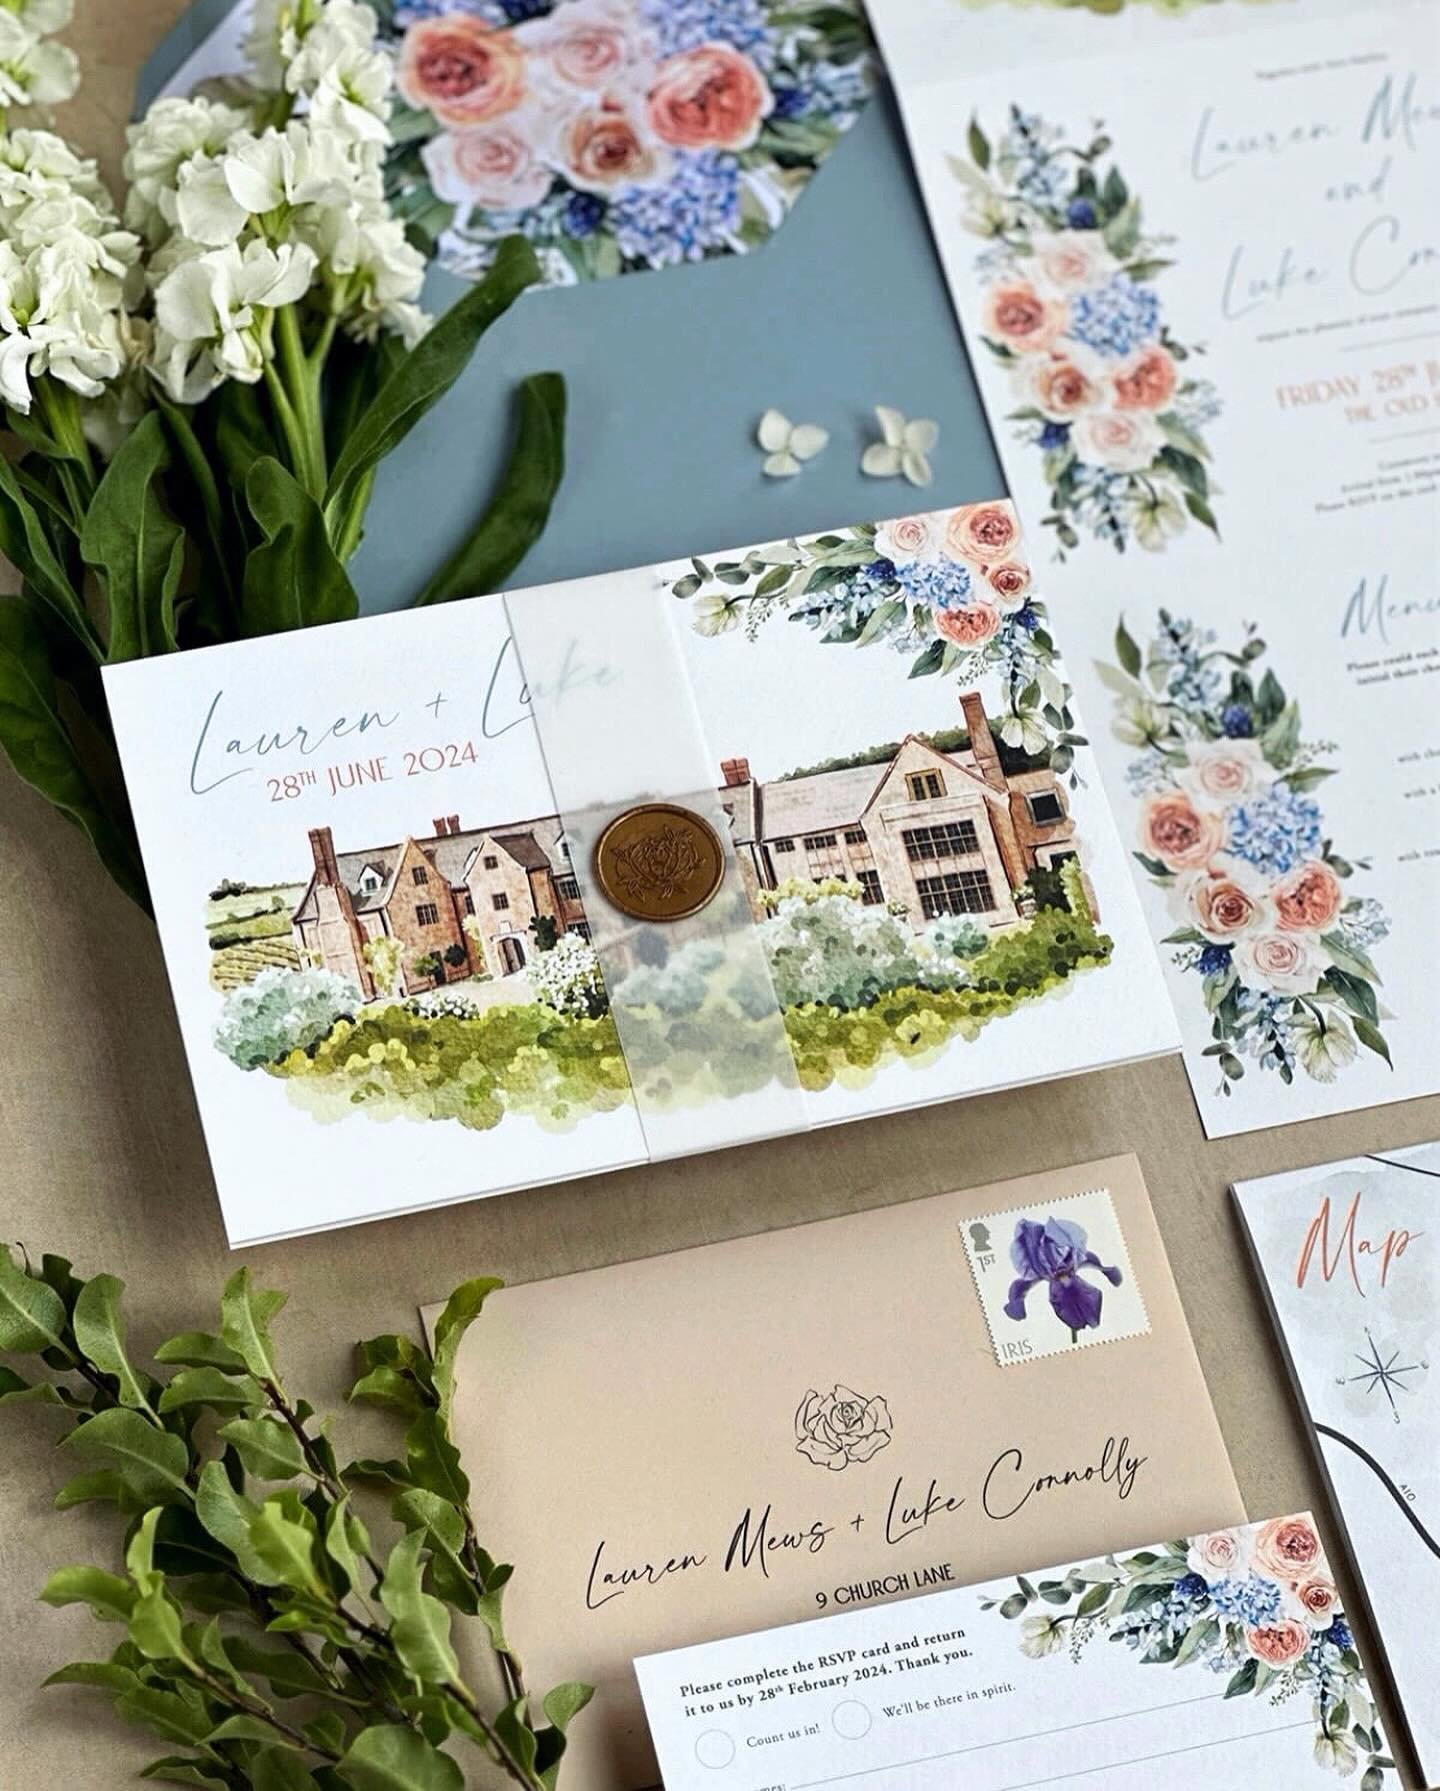 ✨ 𝗙𝗥𝗢𝗠 𝗠𝗢𝗢𝗗 𝗕𝗢𝗔𝗥𝗗 𝗧𝗢 𝗙𝗜𝗡𝗜𝗦𝗛𝗘𝗗 𝗗𝗘𝗦𝗜𝗚𝗡 ✨

Lauren &amp; Luke chose my Bespoke Design Service for their wedding invitations and on the day stationery.

Using their wedding florals I matched the colours and flowers being used 